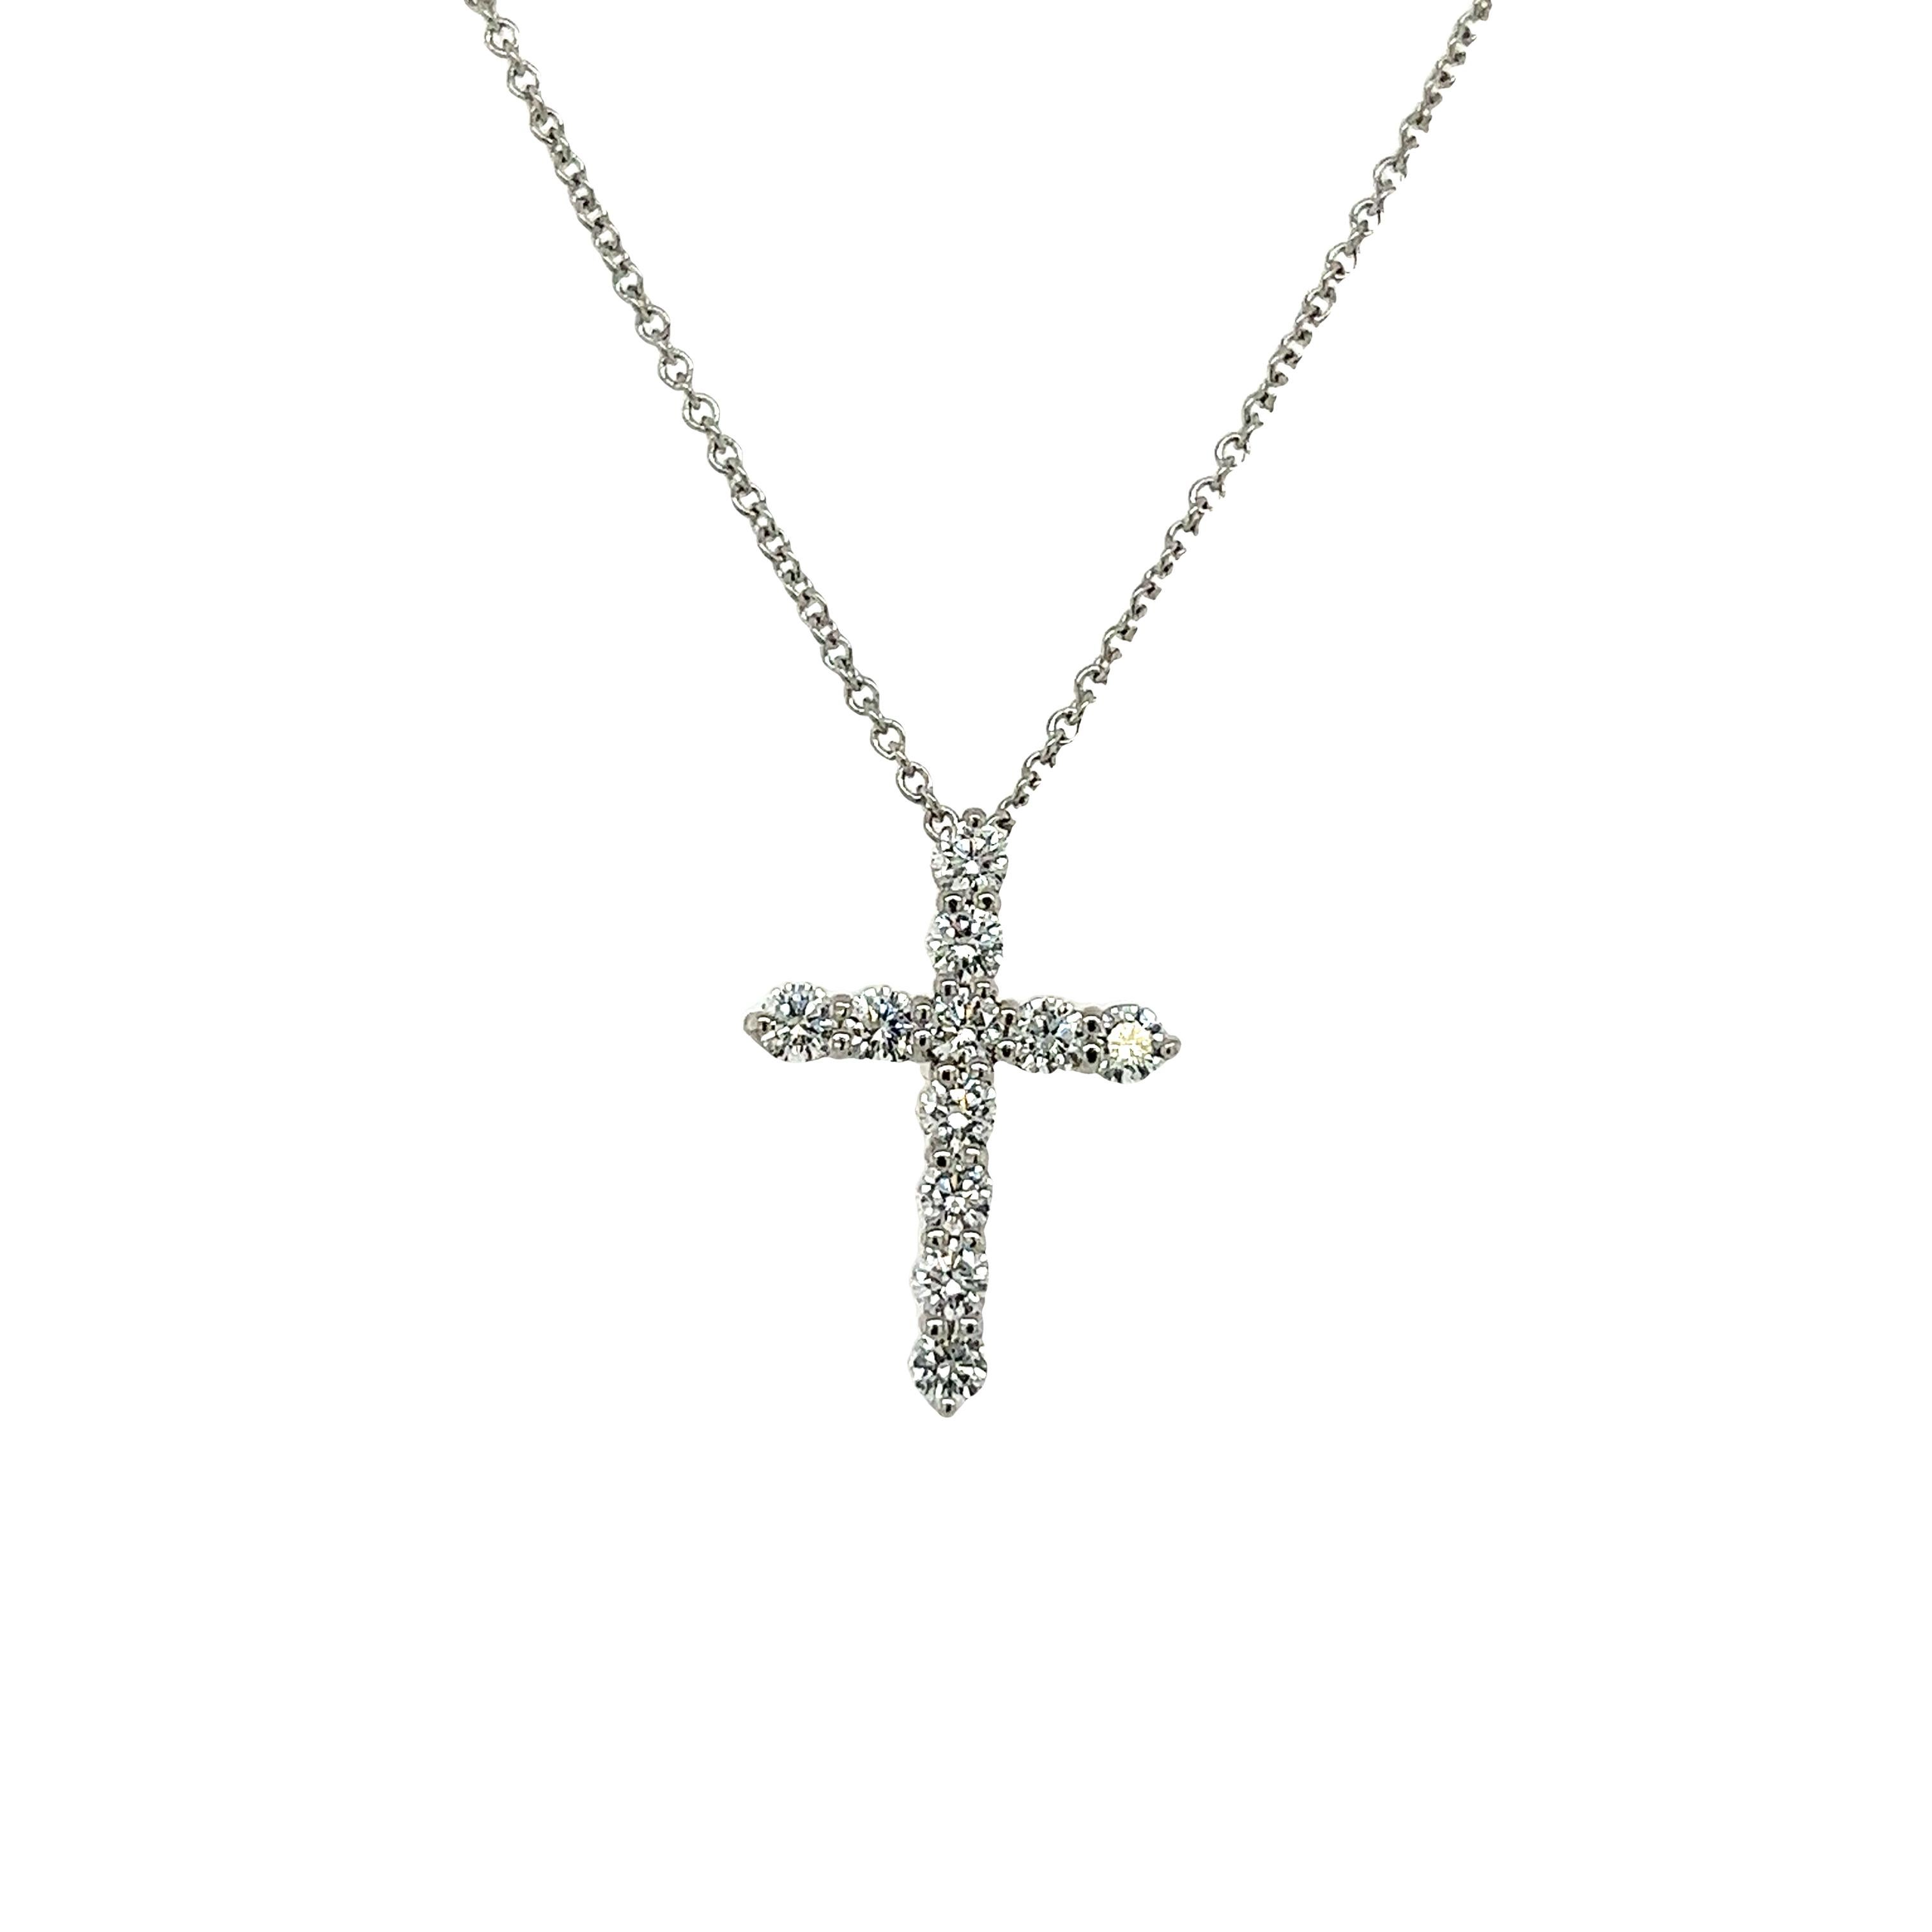 Elevate your style with the timeless elegance of the Tiffany & Co. Diamond Cross Pendant. Expertly crafted from the finest materials, this exquisite piece features a classic cross design adorned with sparkling round brilliant cut diamonds totaling